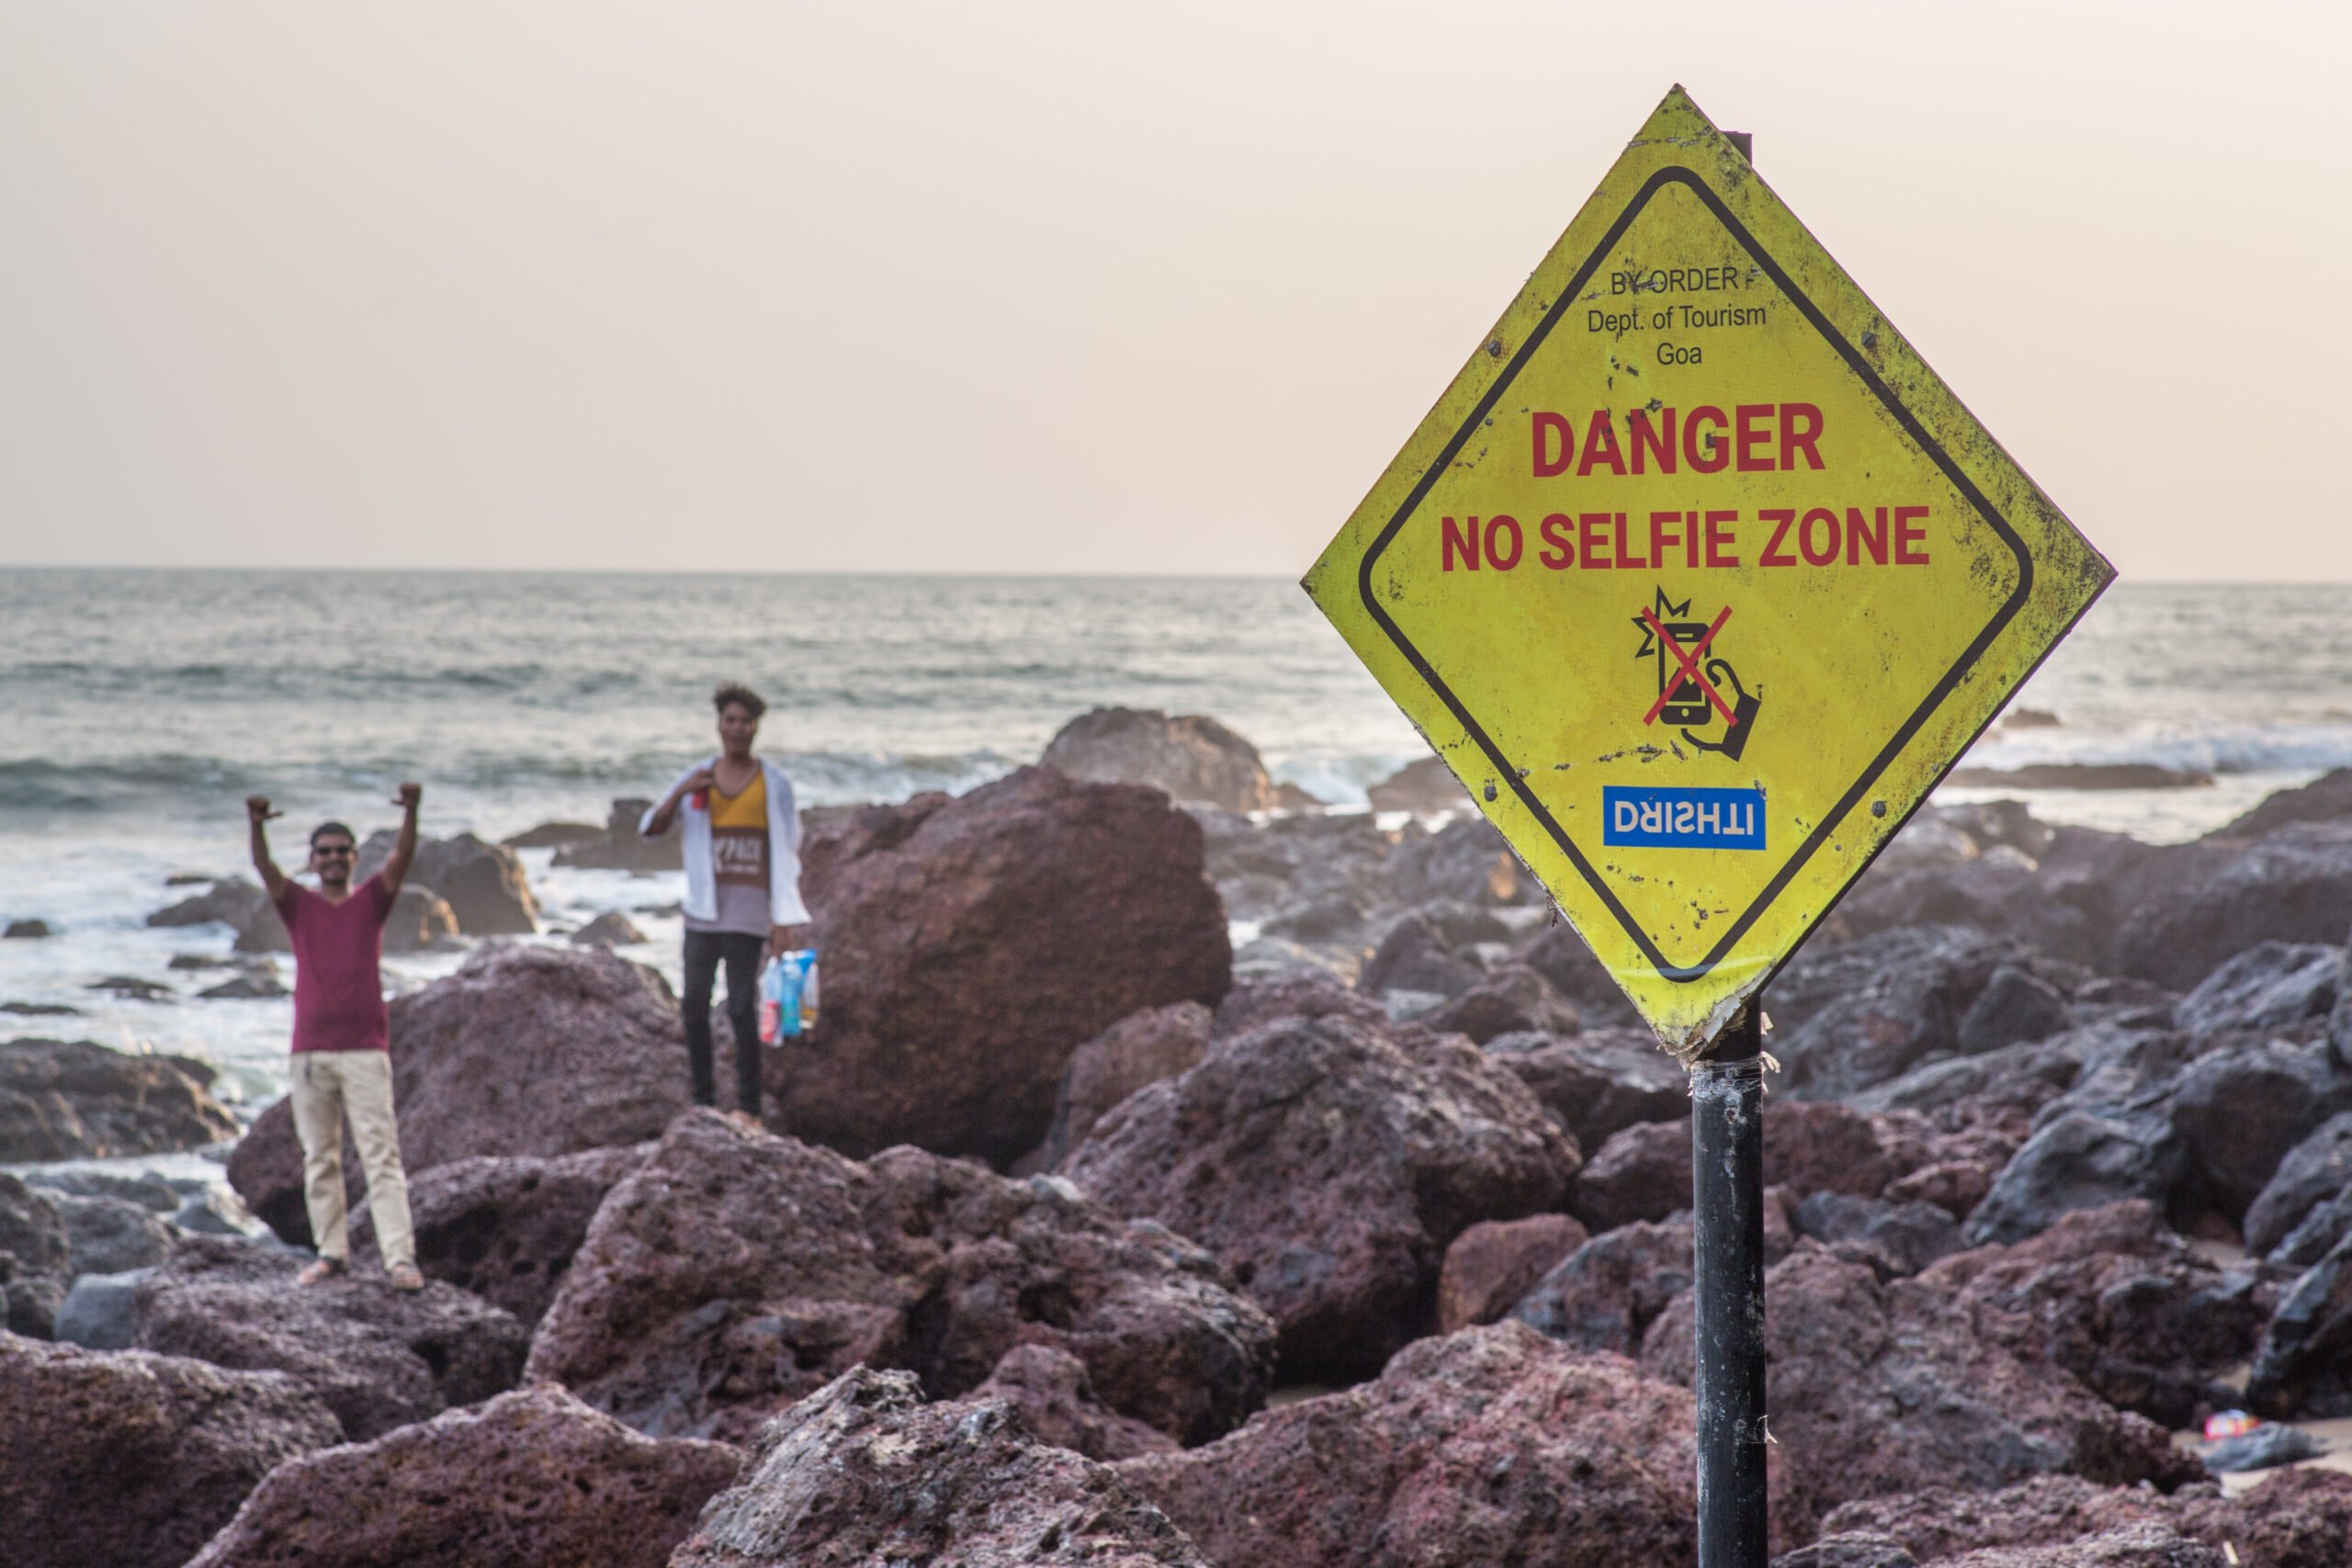 Stay safe when partying in Goa